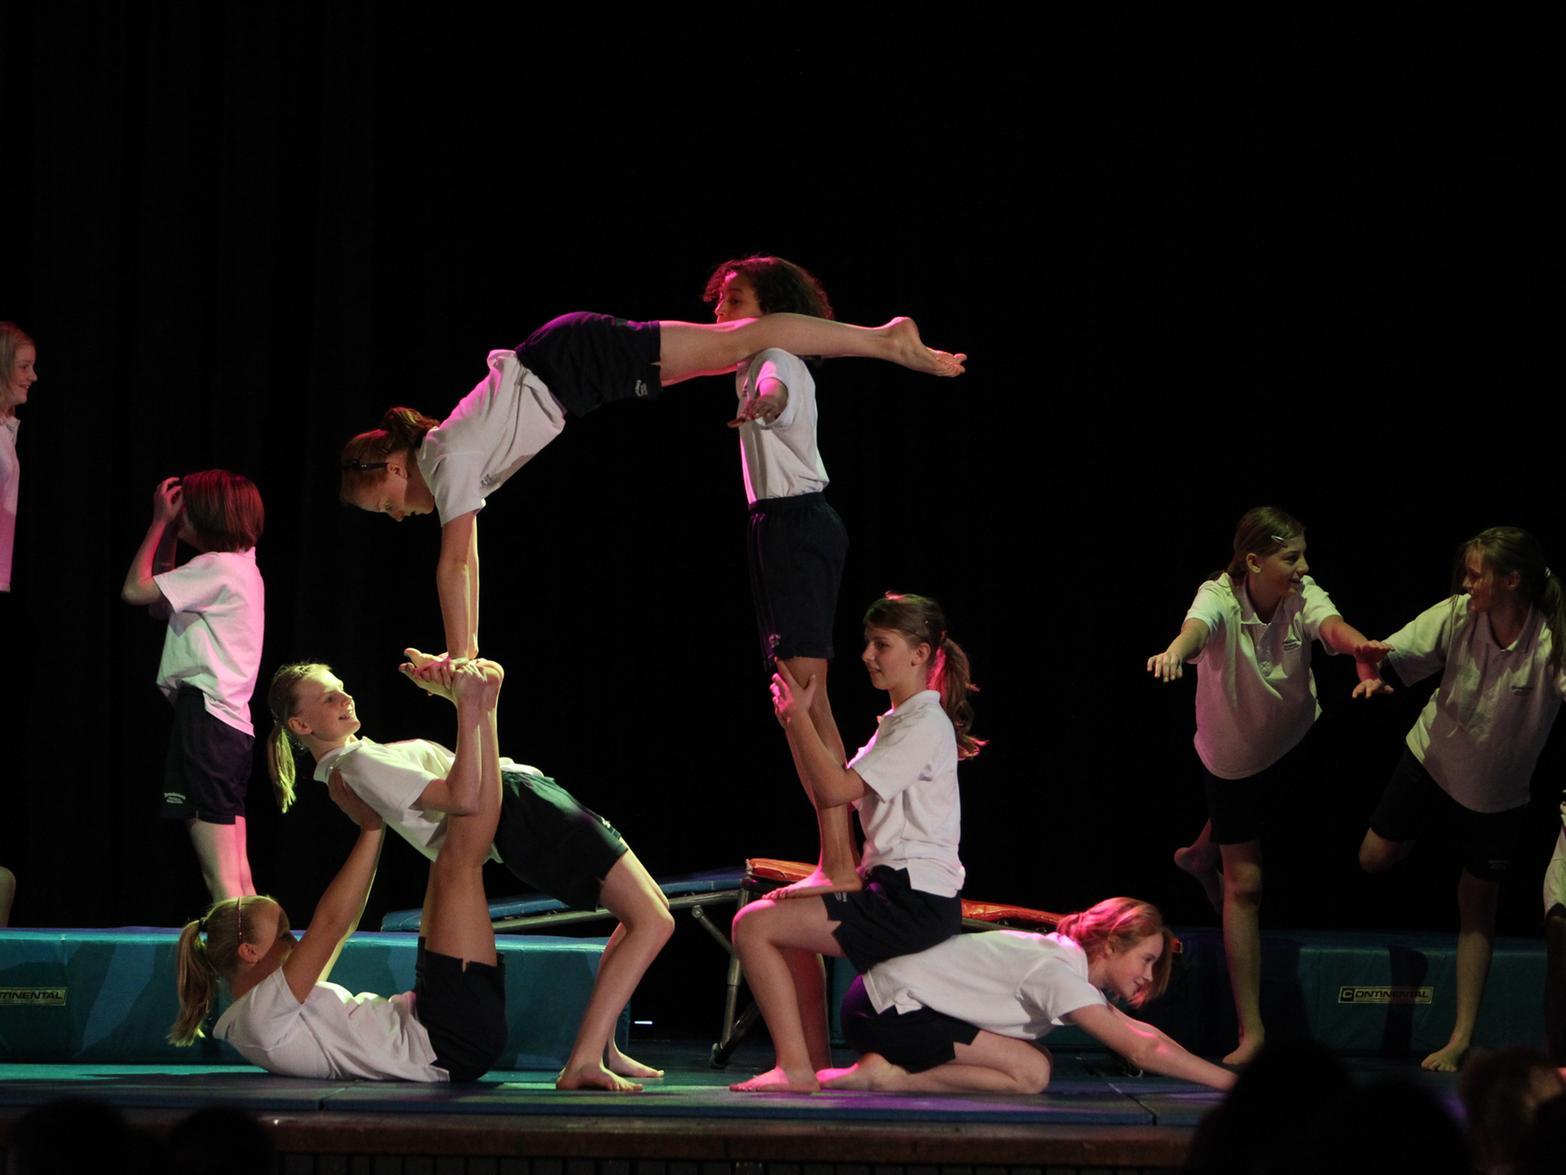 Every two years Brooksbank School on Victoria Road would showcase talents of students in the Gym and Dance shows.